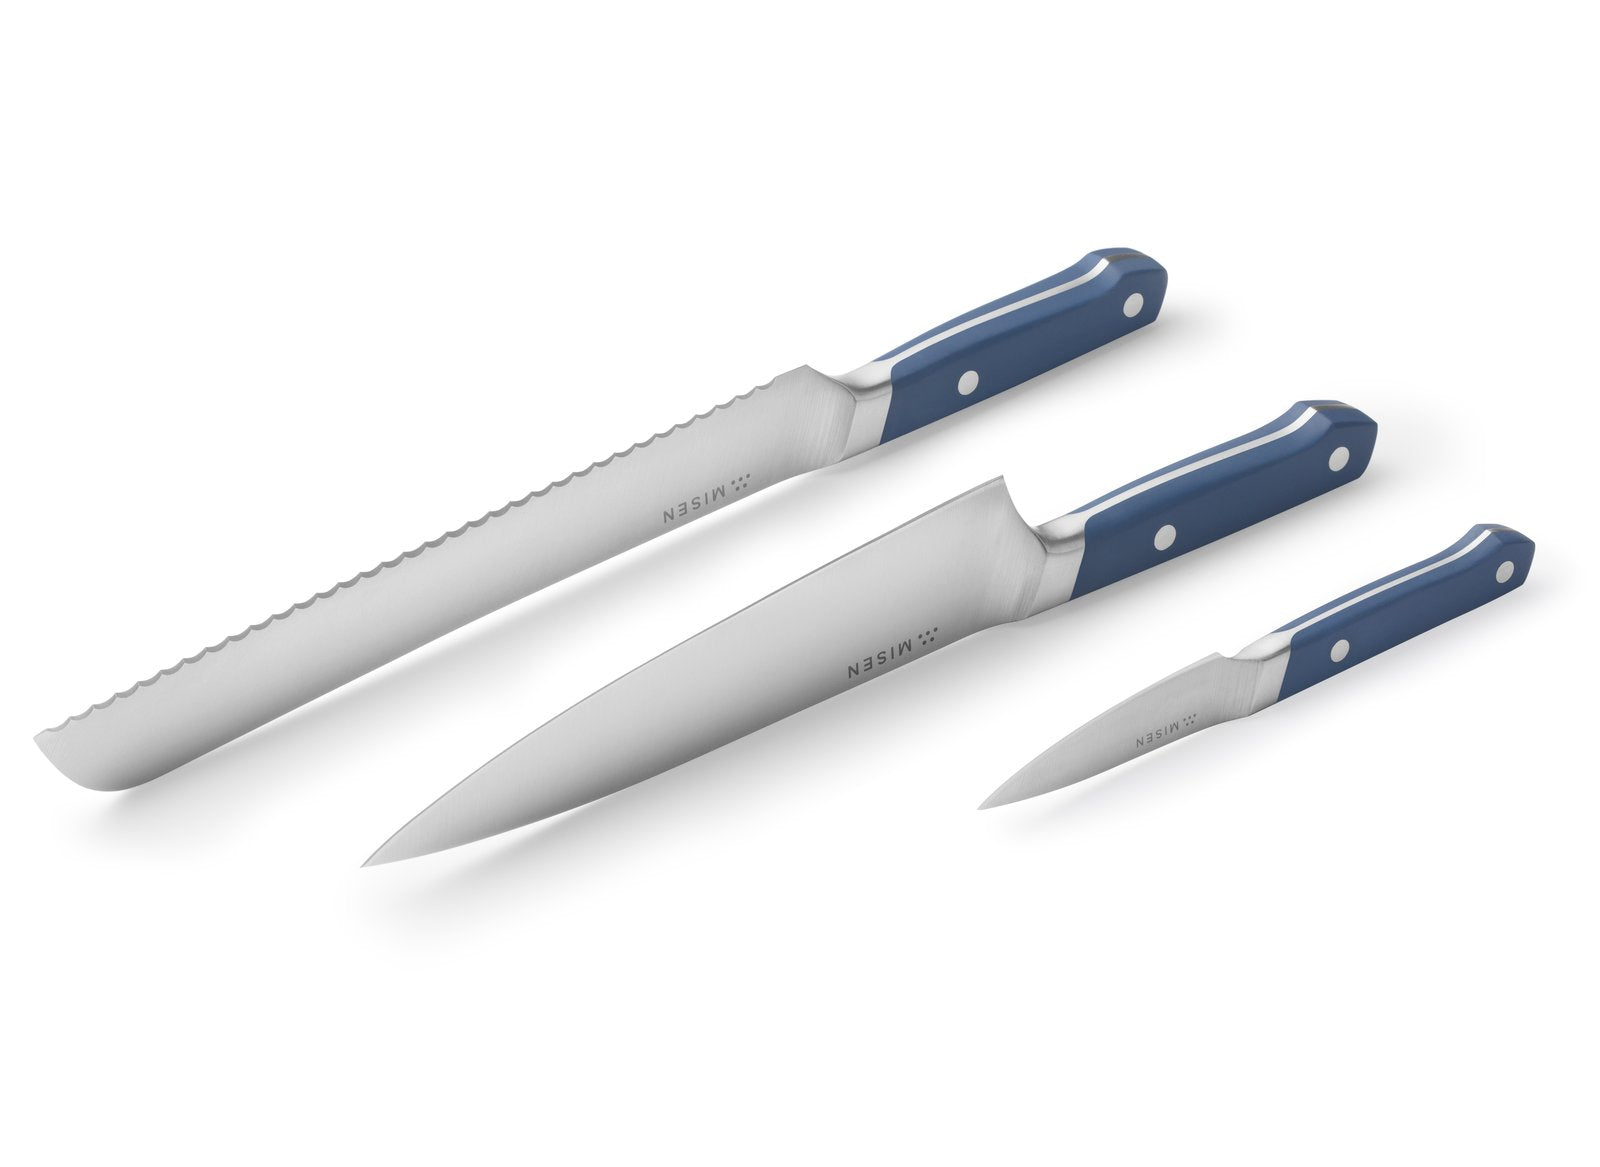 EDGE STABILITY IN BUTCHER'S AND KITCHEN KNIVES